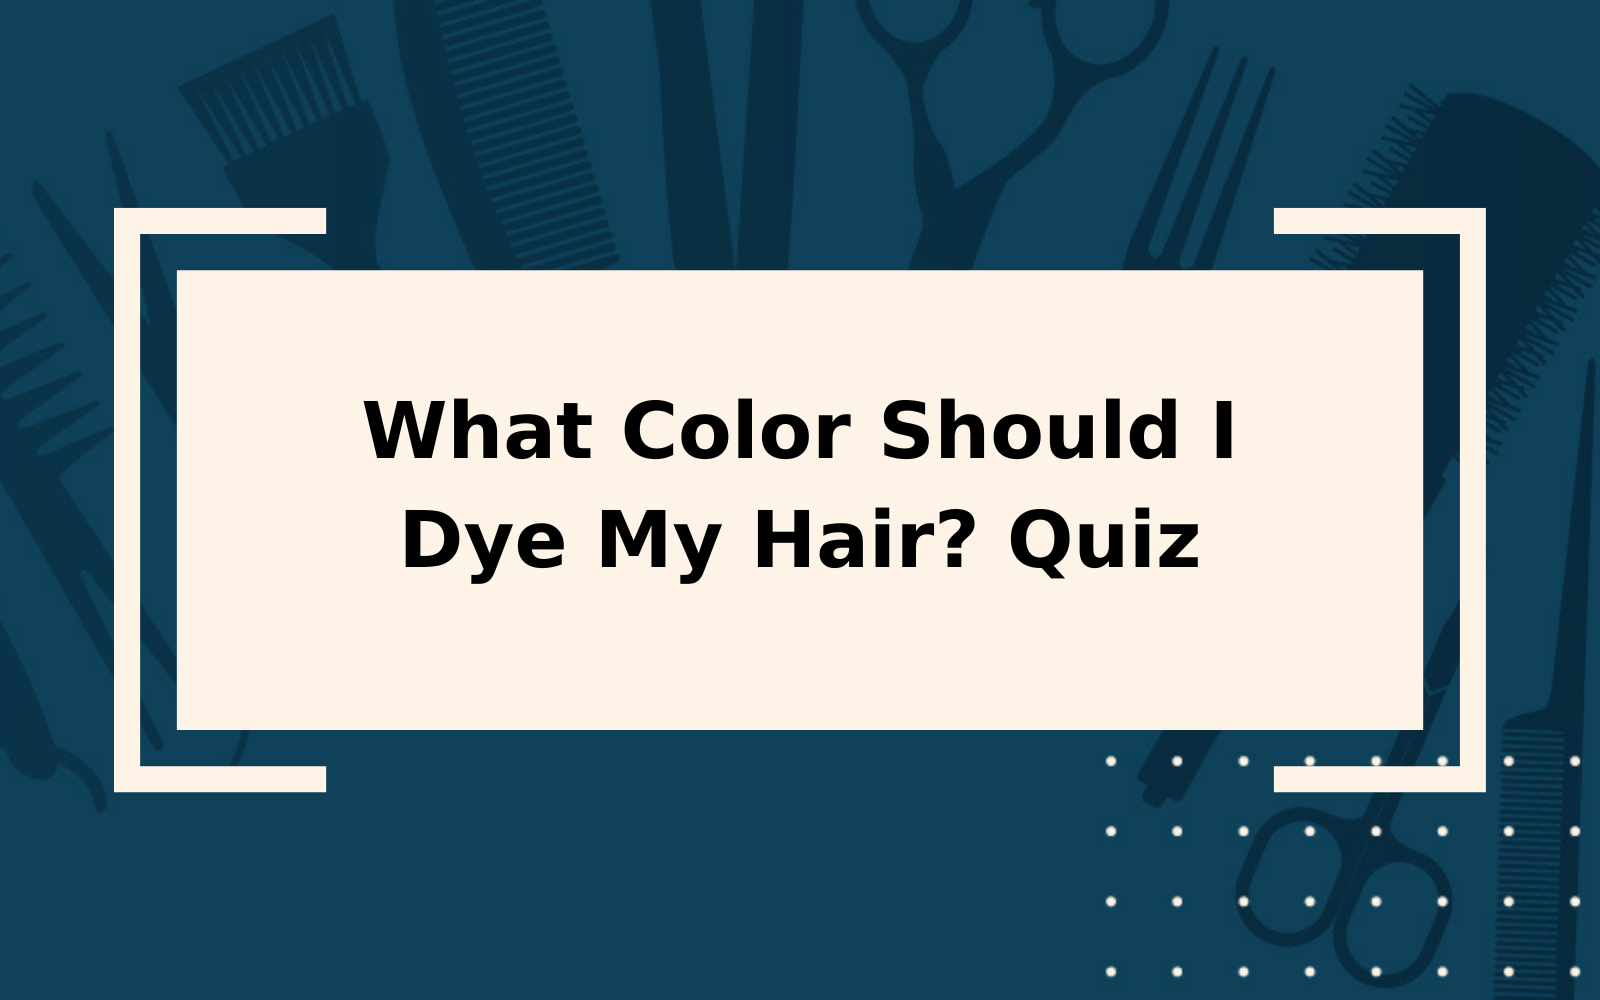 What Color Should I Dye My Hair? | Quiz Time!